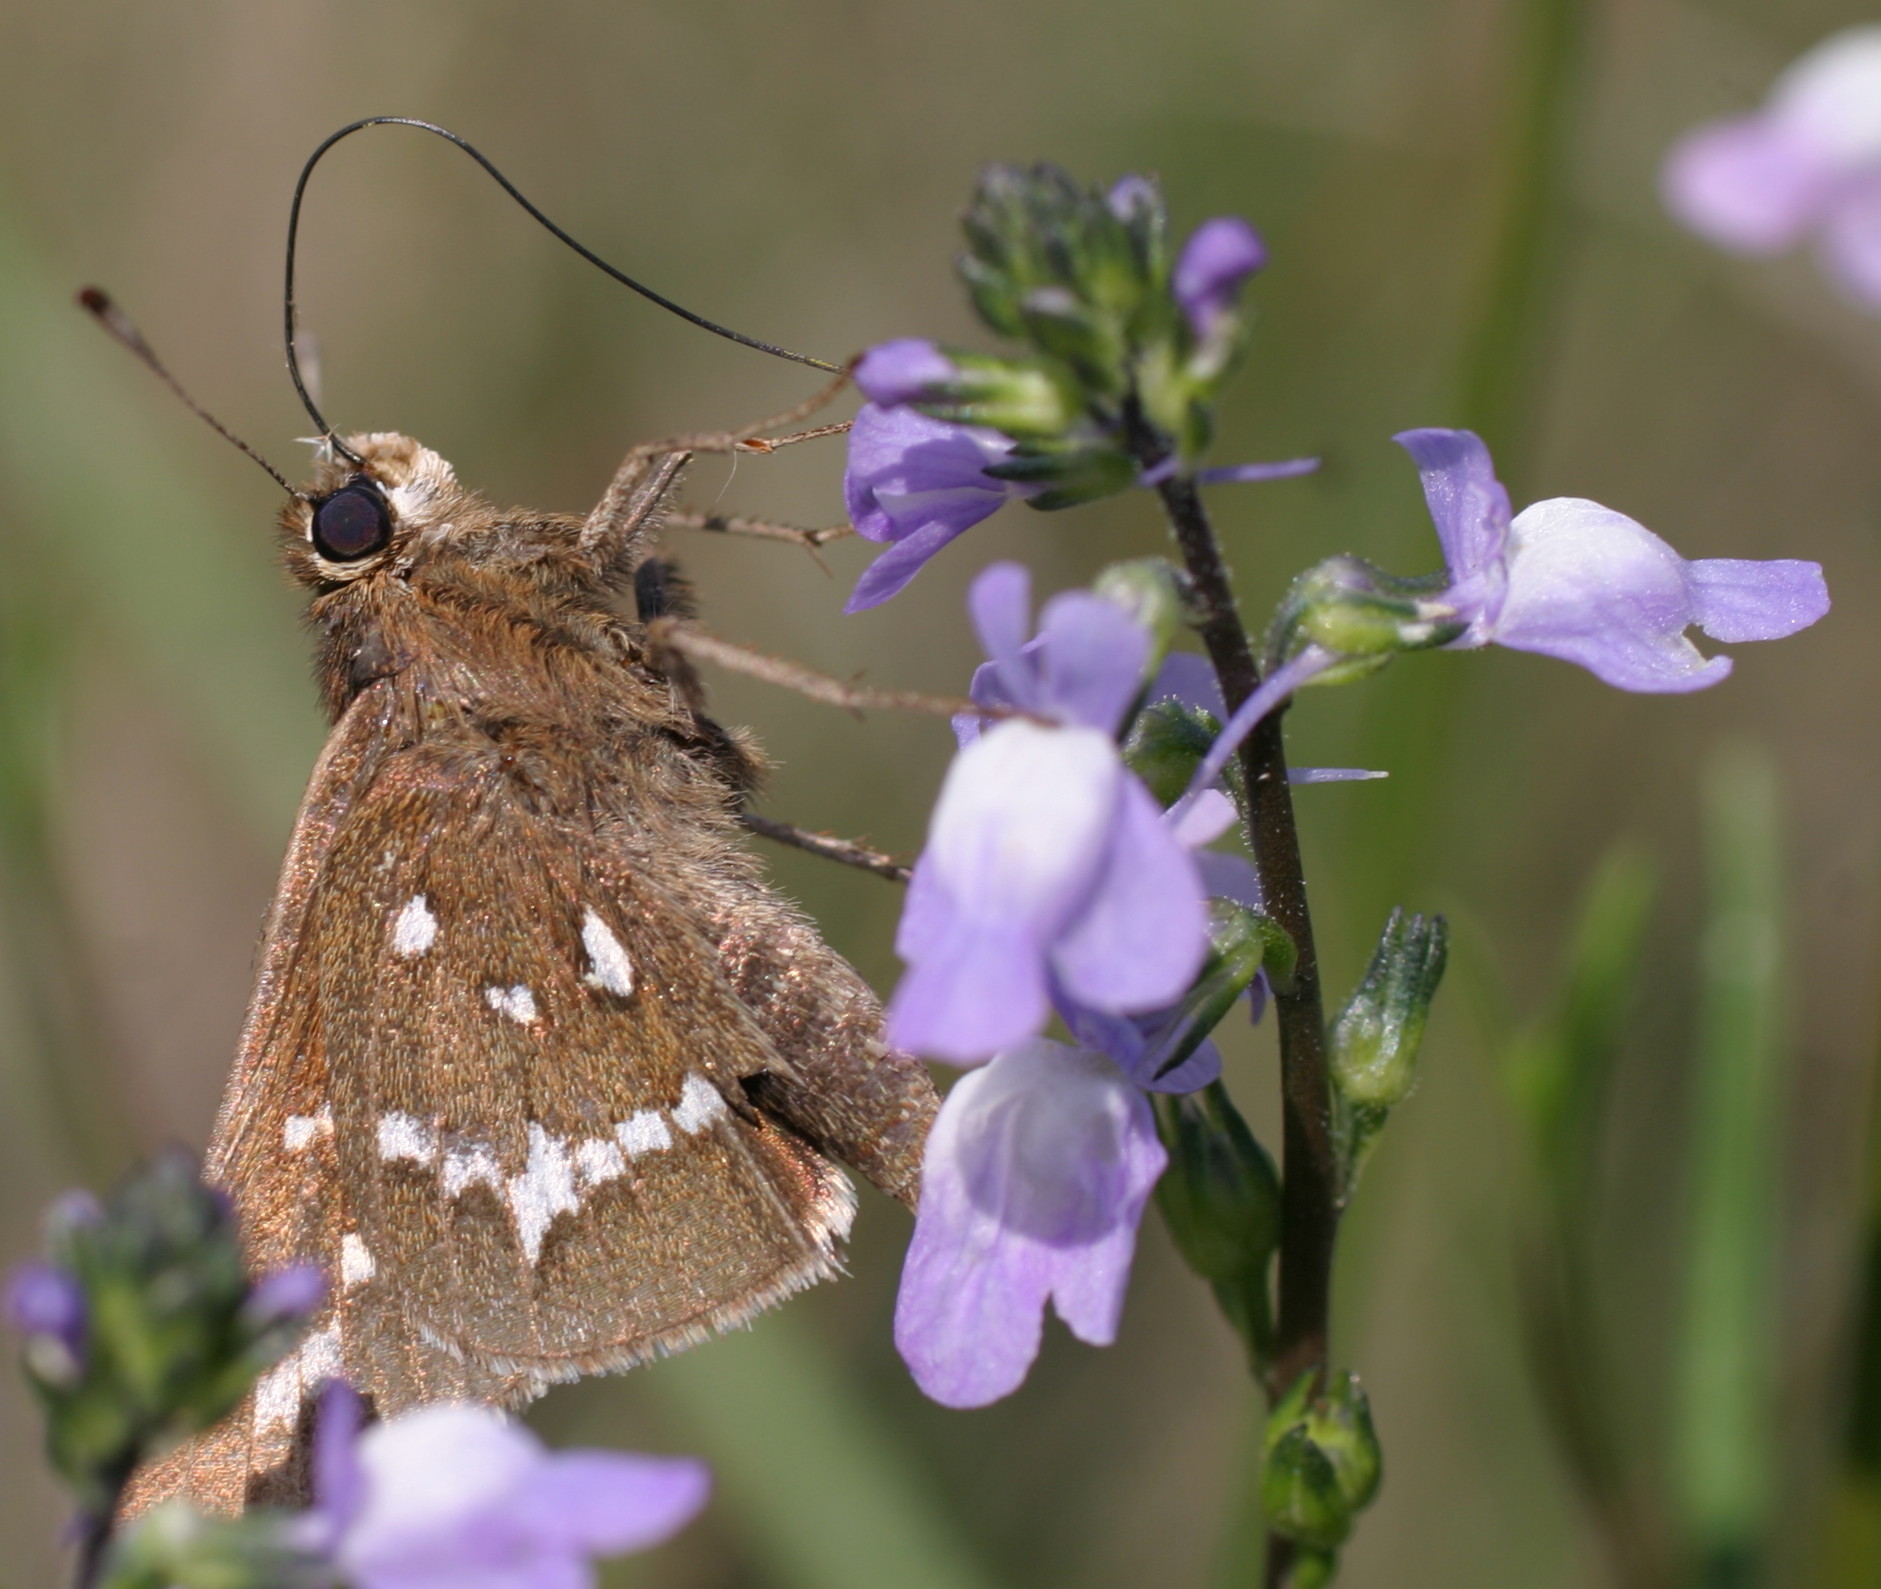 A crystal skipper on common toadflax.